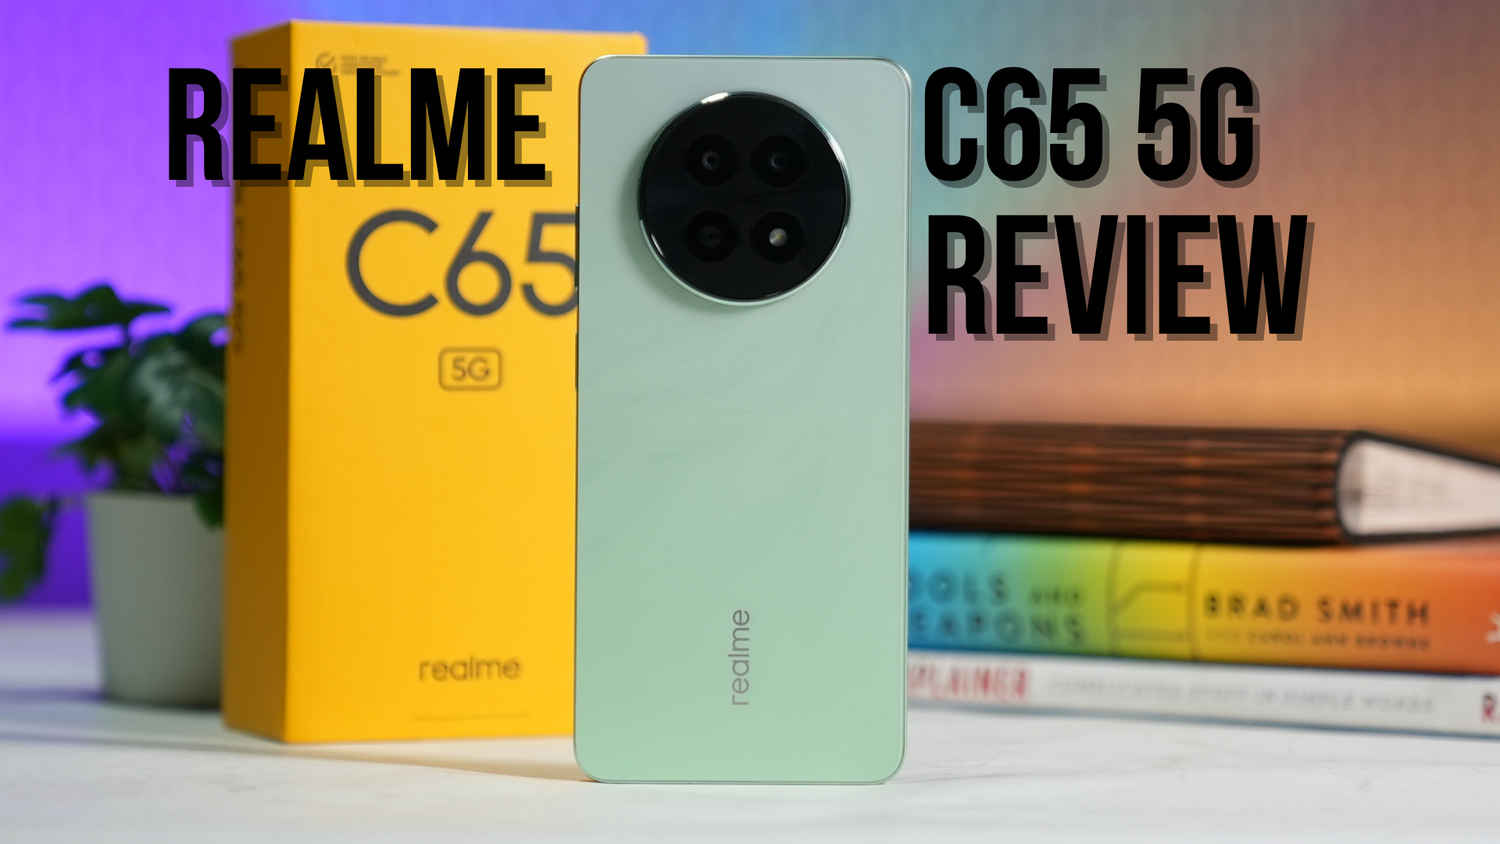 Realme C65 5G Review: The perks of 5G with minimal compromises